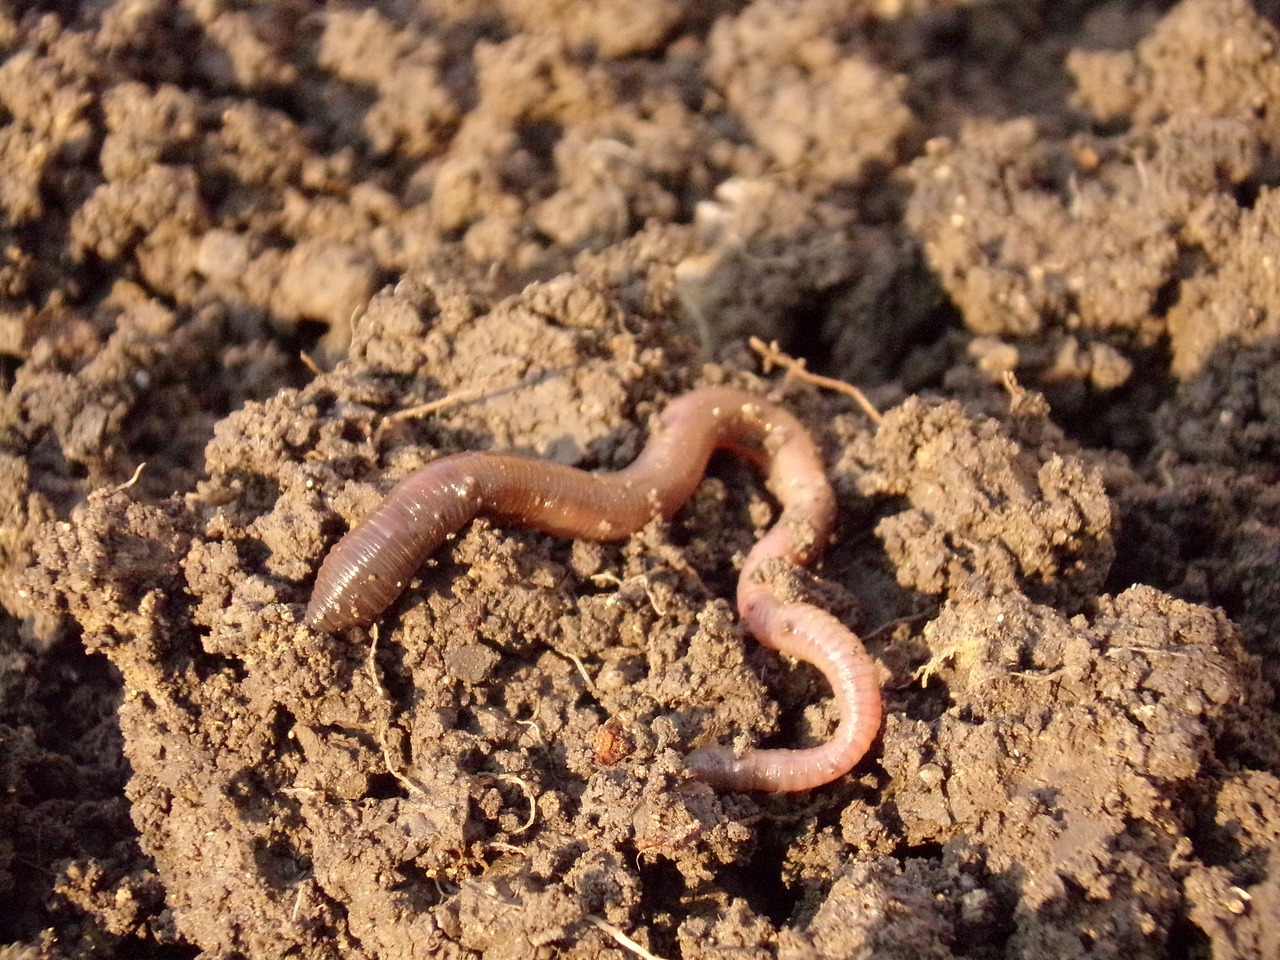 Don’t Call Yourself a Trivia Expert If You Can’t Get 15/20 on This General Knowledge Quiz earthworm